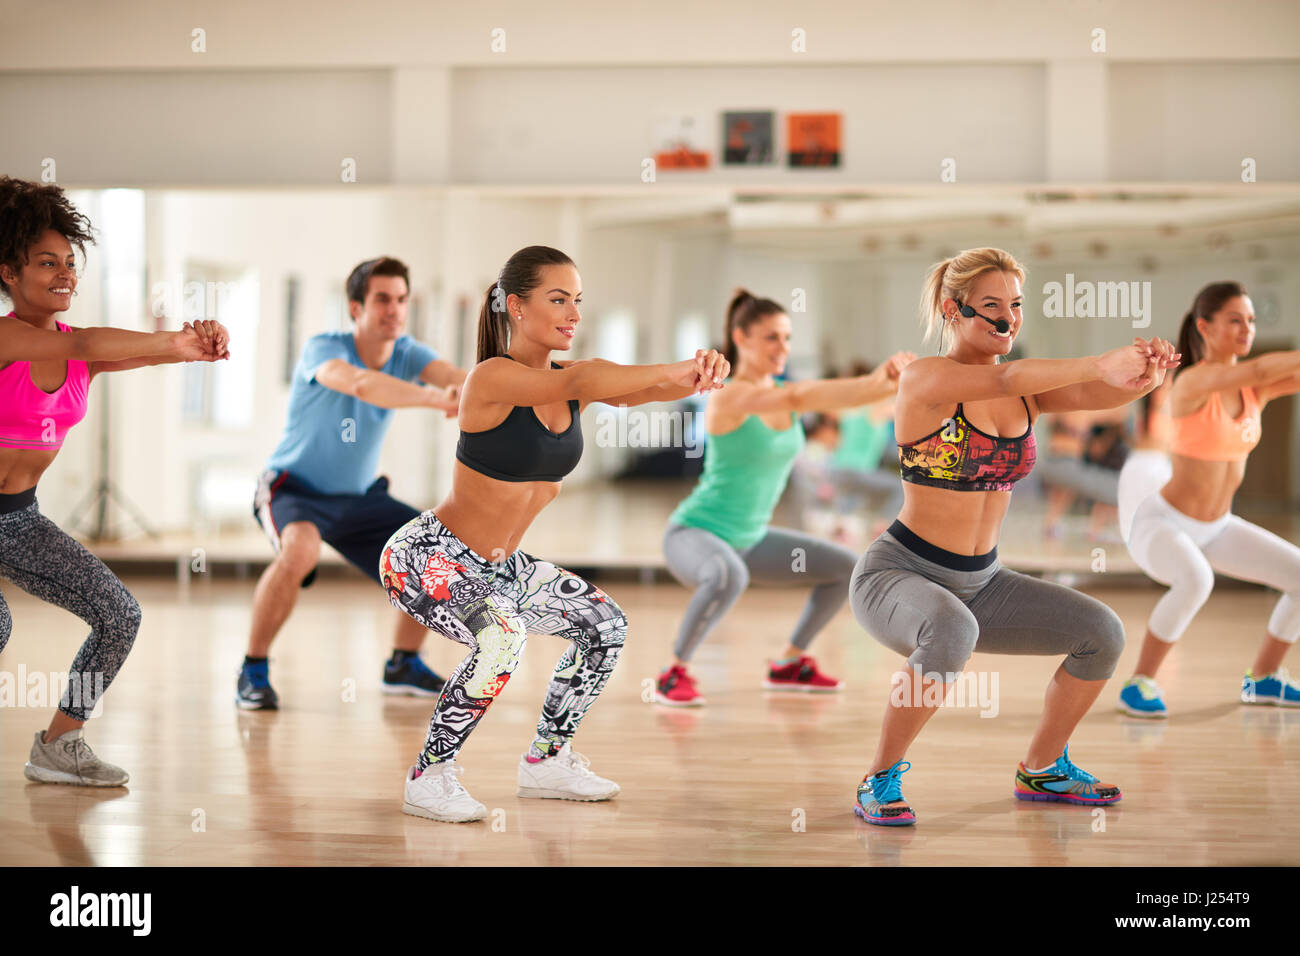 Fitness group doing exercises for shaping breech on fitness class Stock Photo